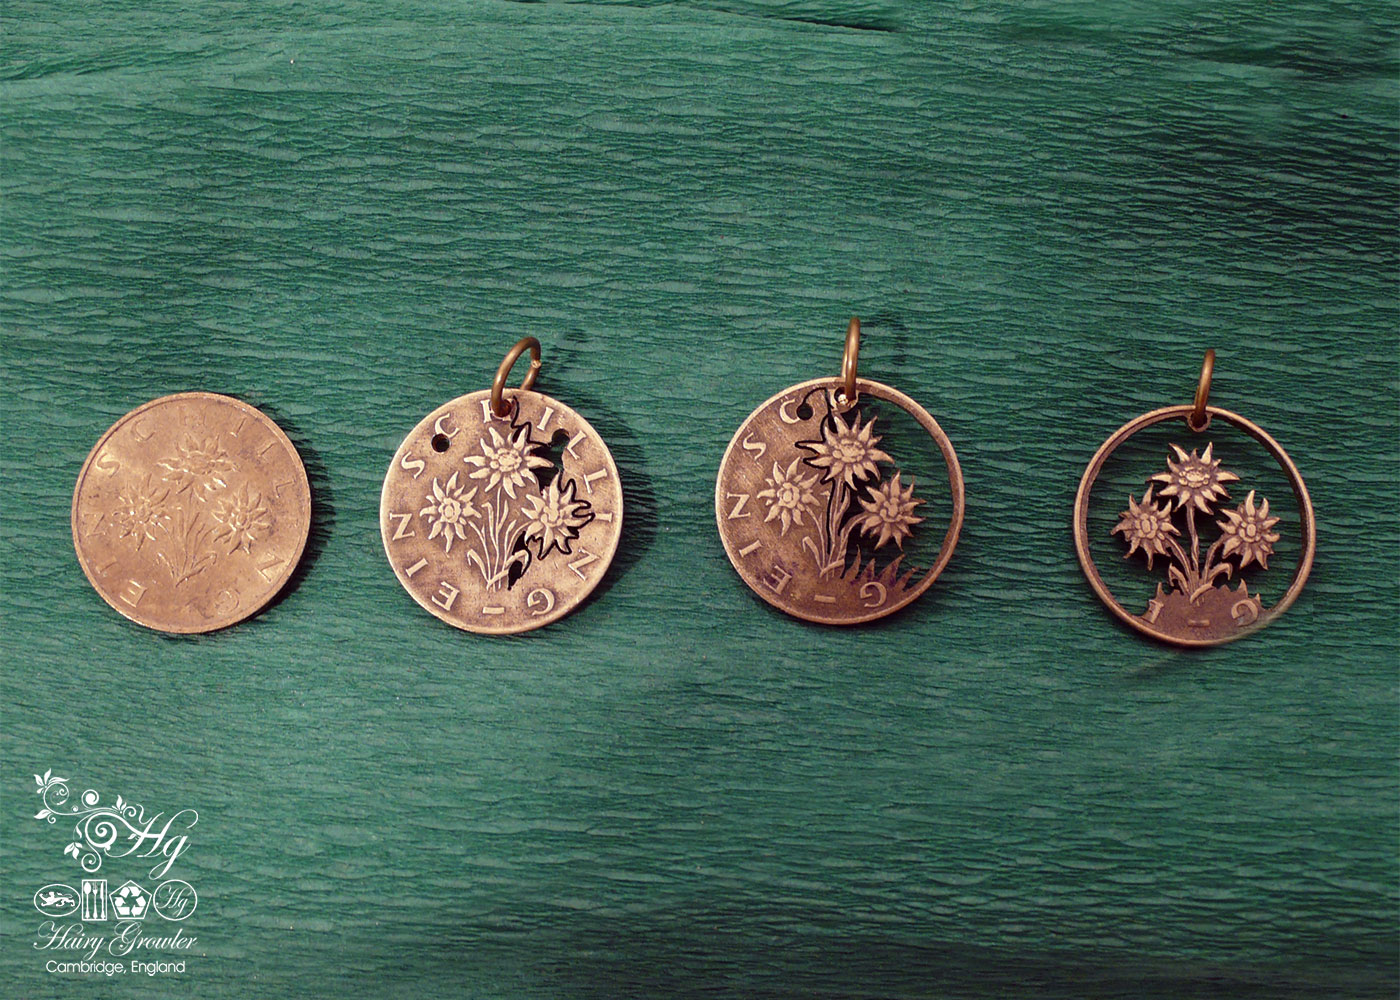 Handmade and recycled flower coin pendant necklace